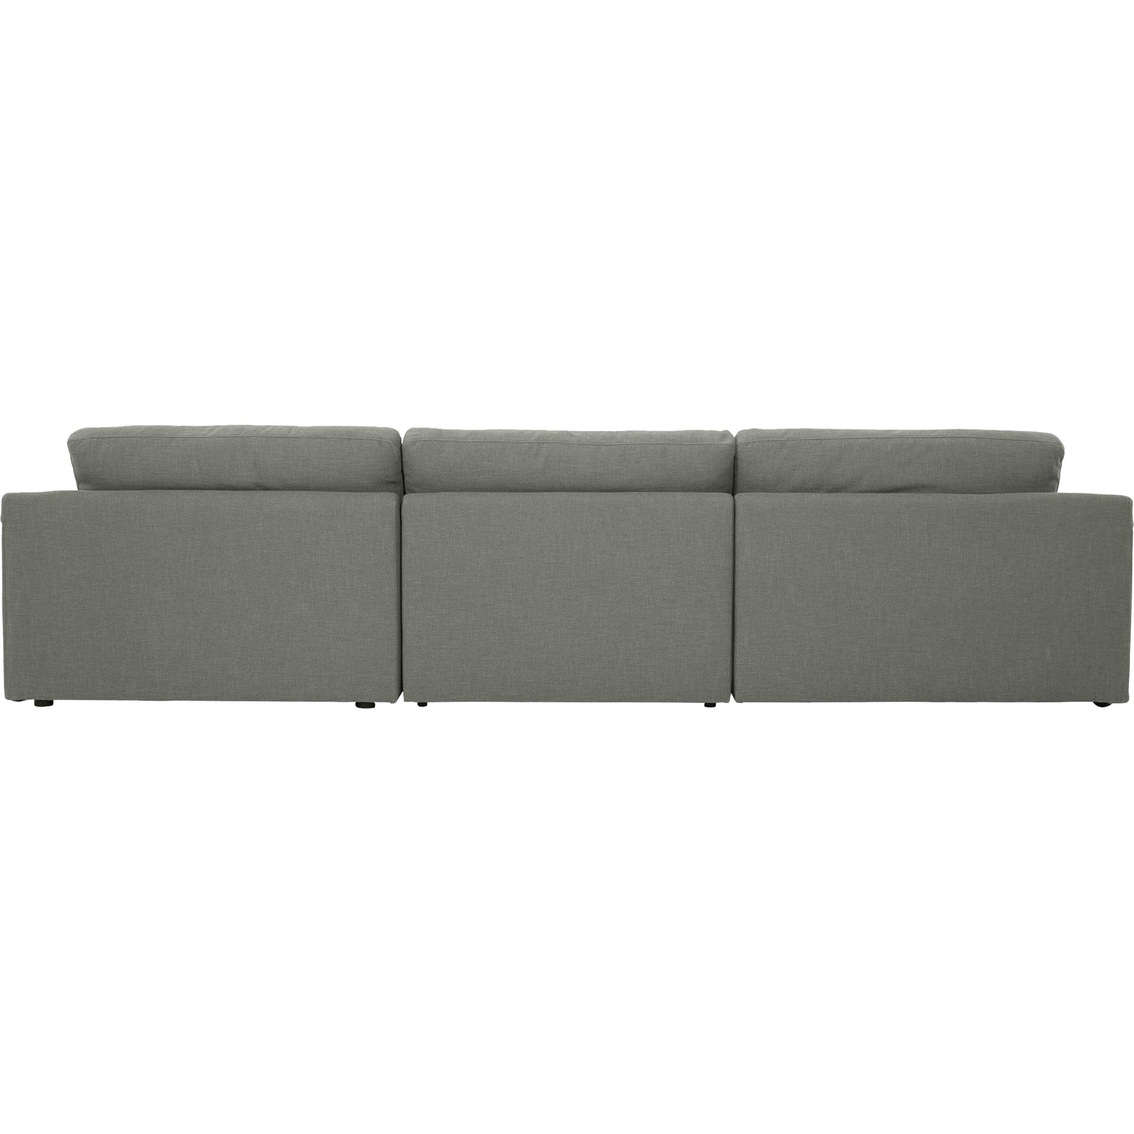 Millennium by Ashley Elyza 3 pc. Sectional with Chaise - Image 2 of 4